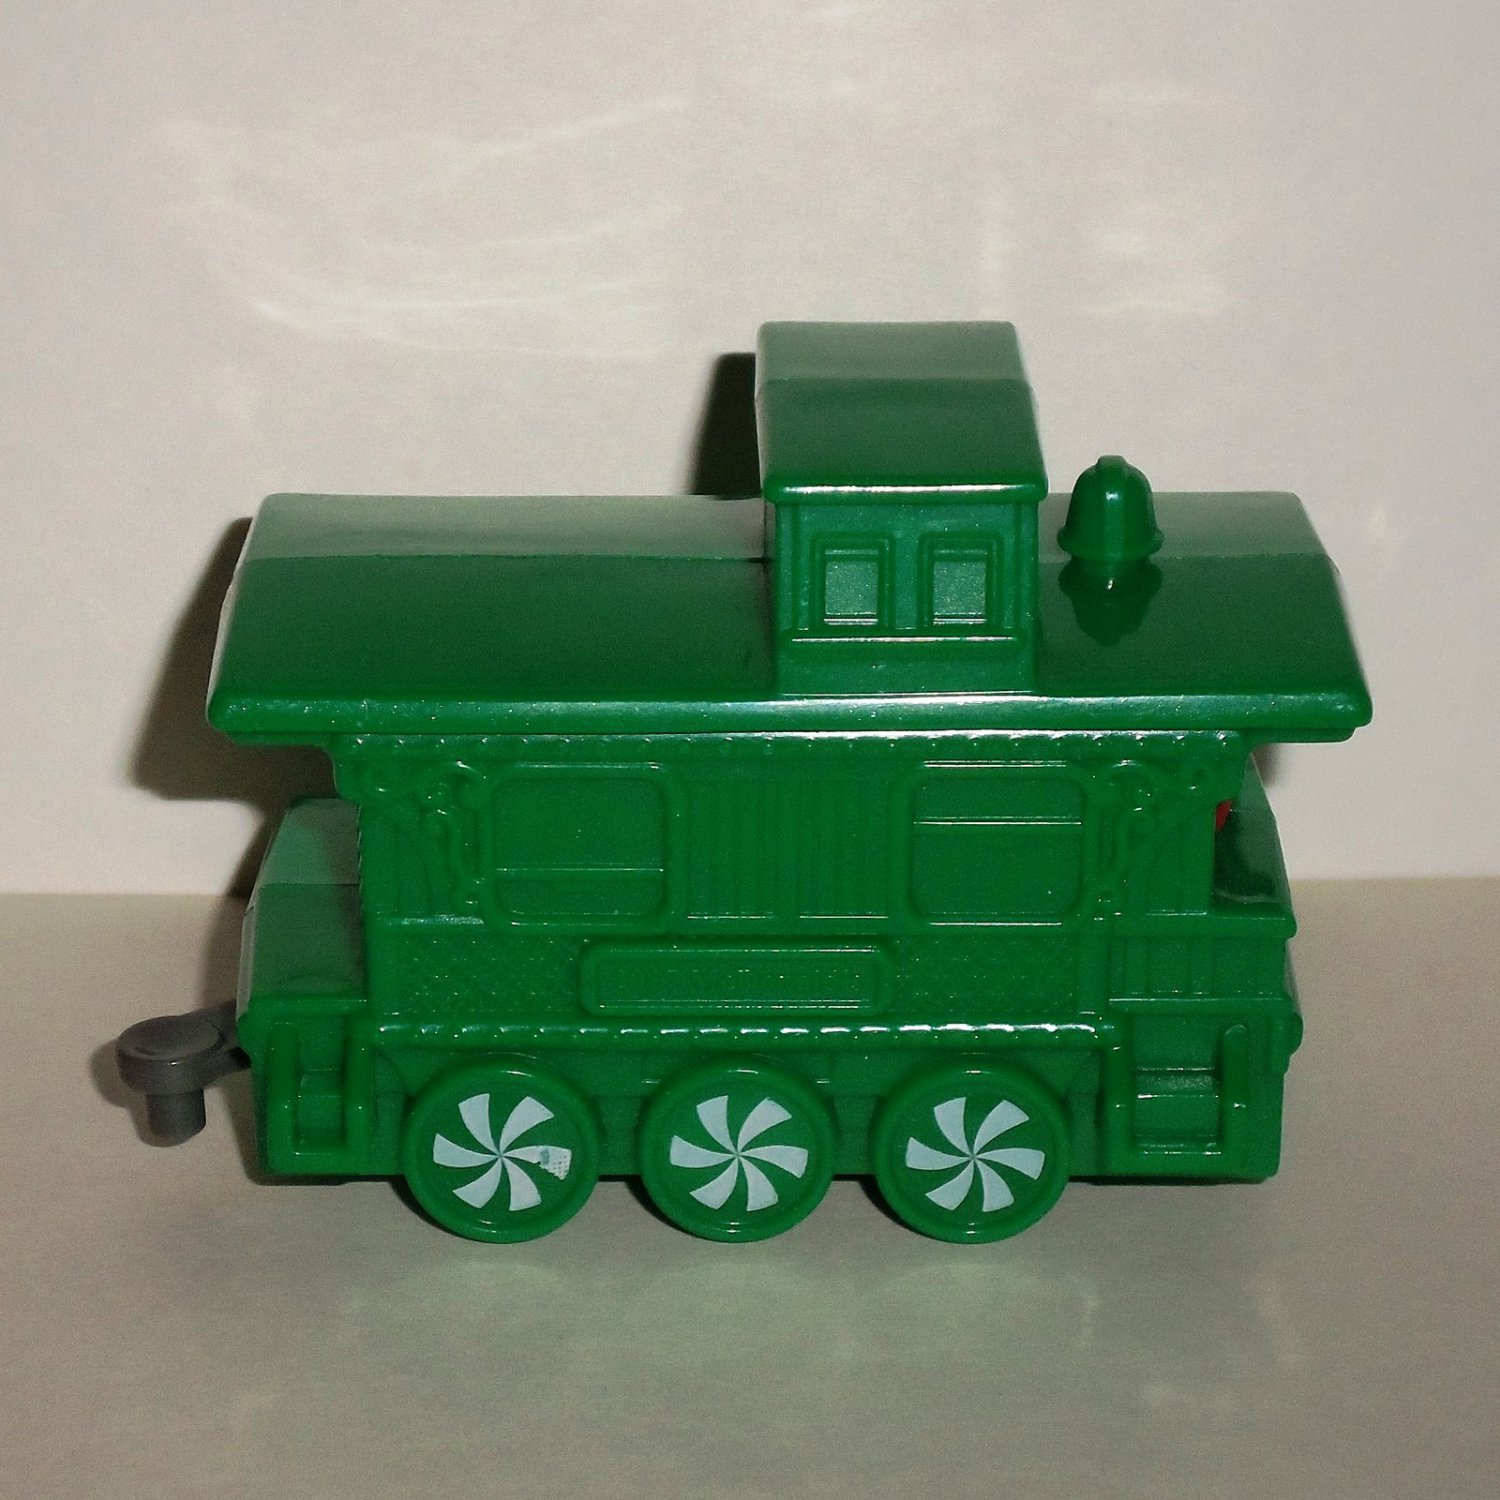 2017 McDonald's Caboose Holiday Express Green Train Car Happy Meal Toy #12 